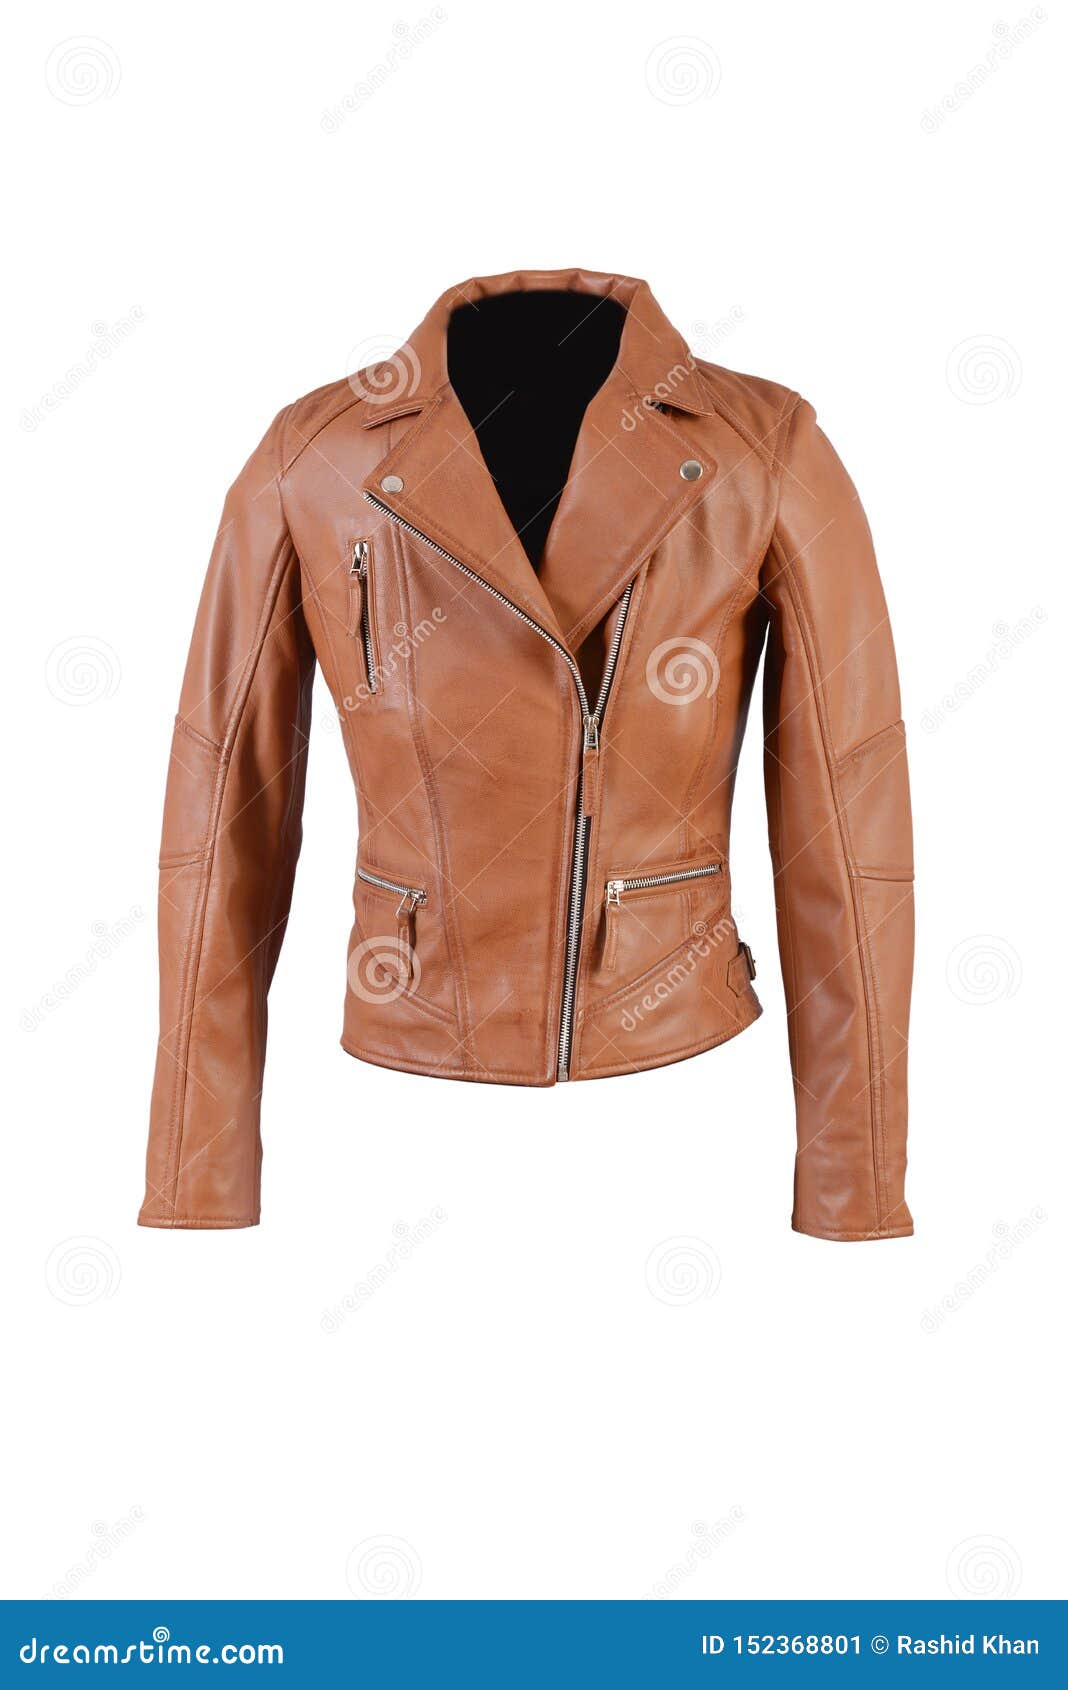 Most Beautiful Light Brown Color Leather Jacket For Girls Photo Stock Image Image Of Leather Phtos 152368801